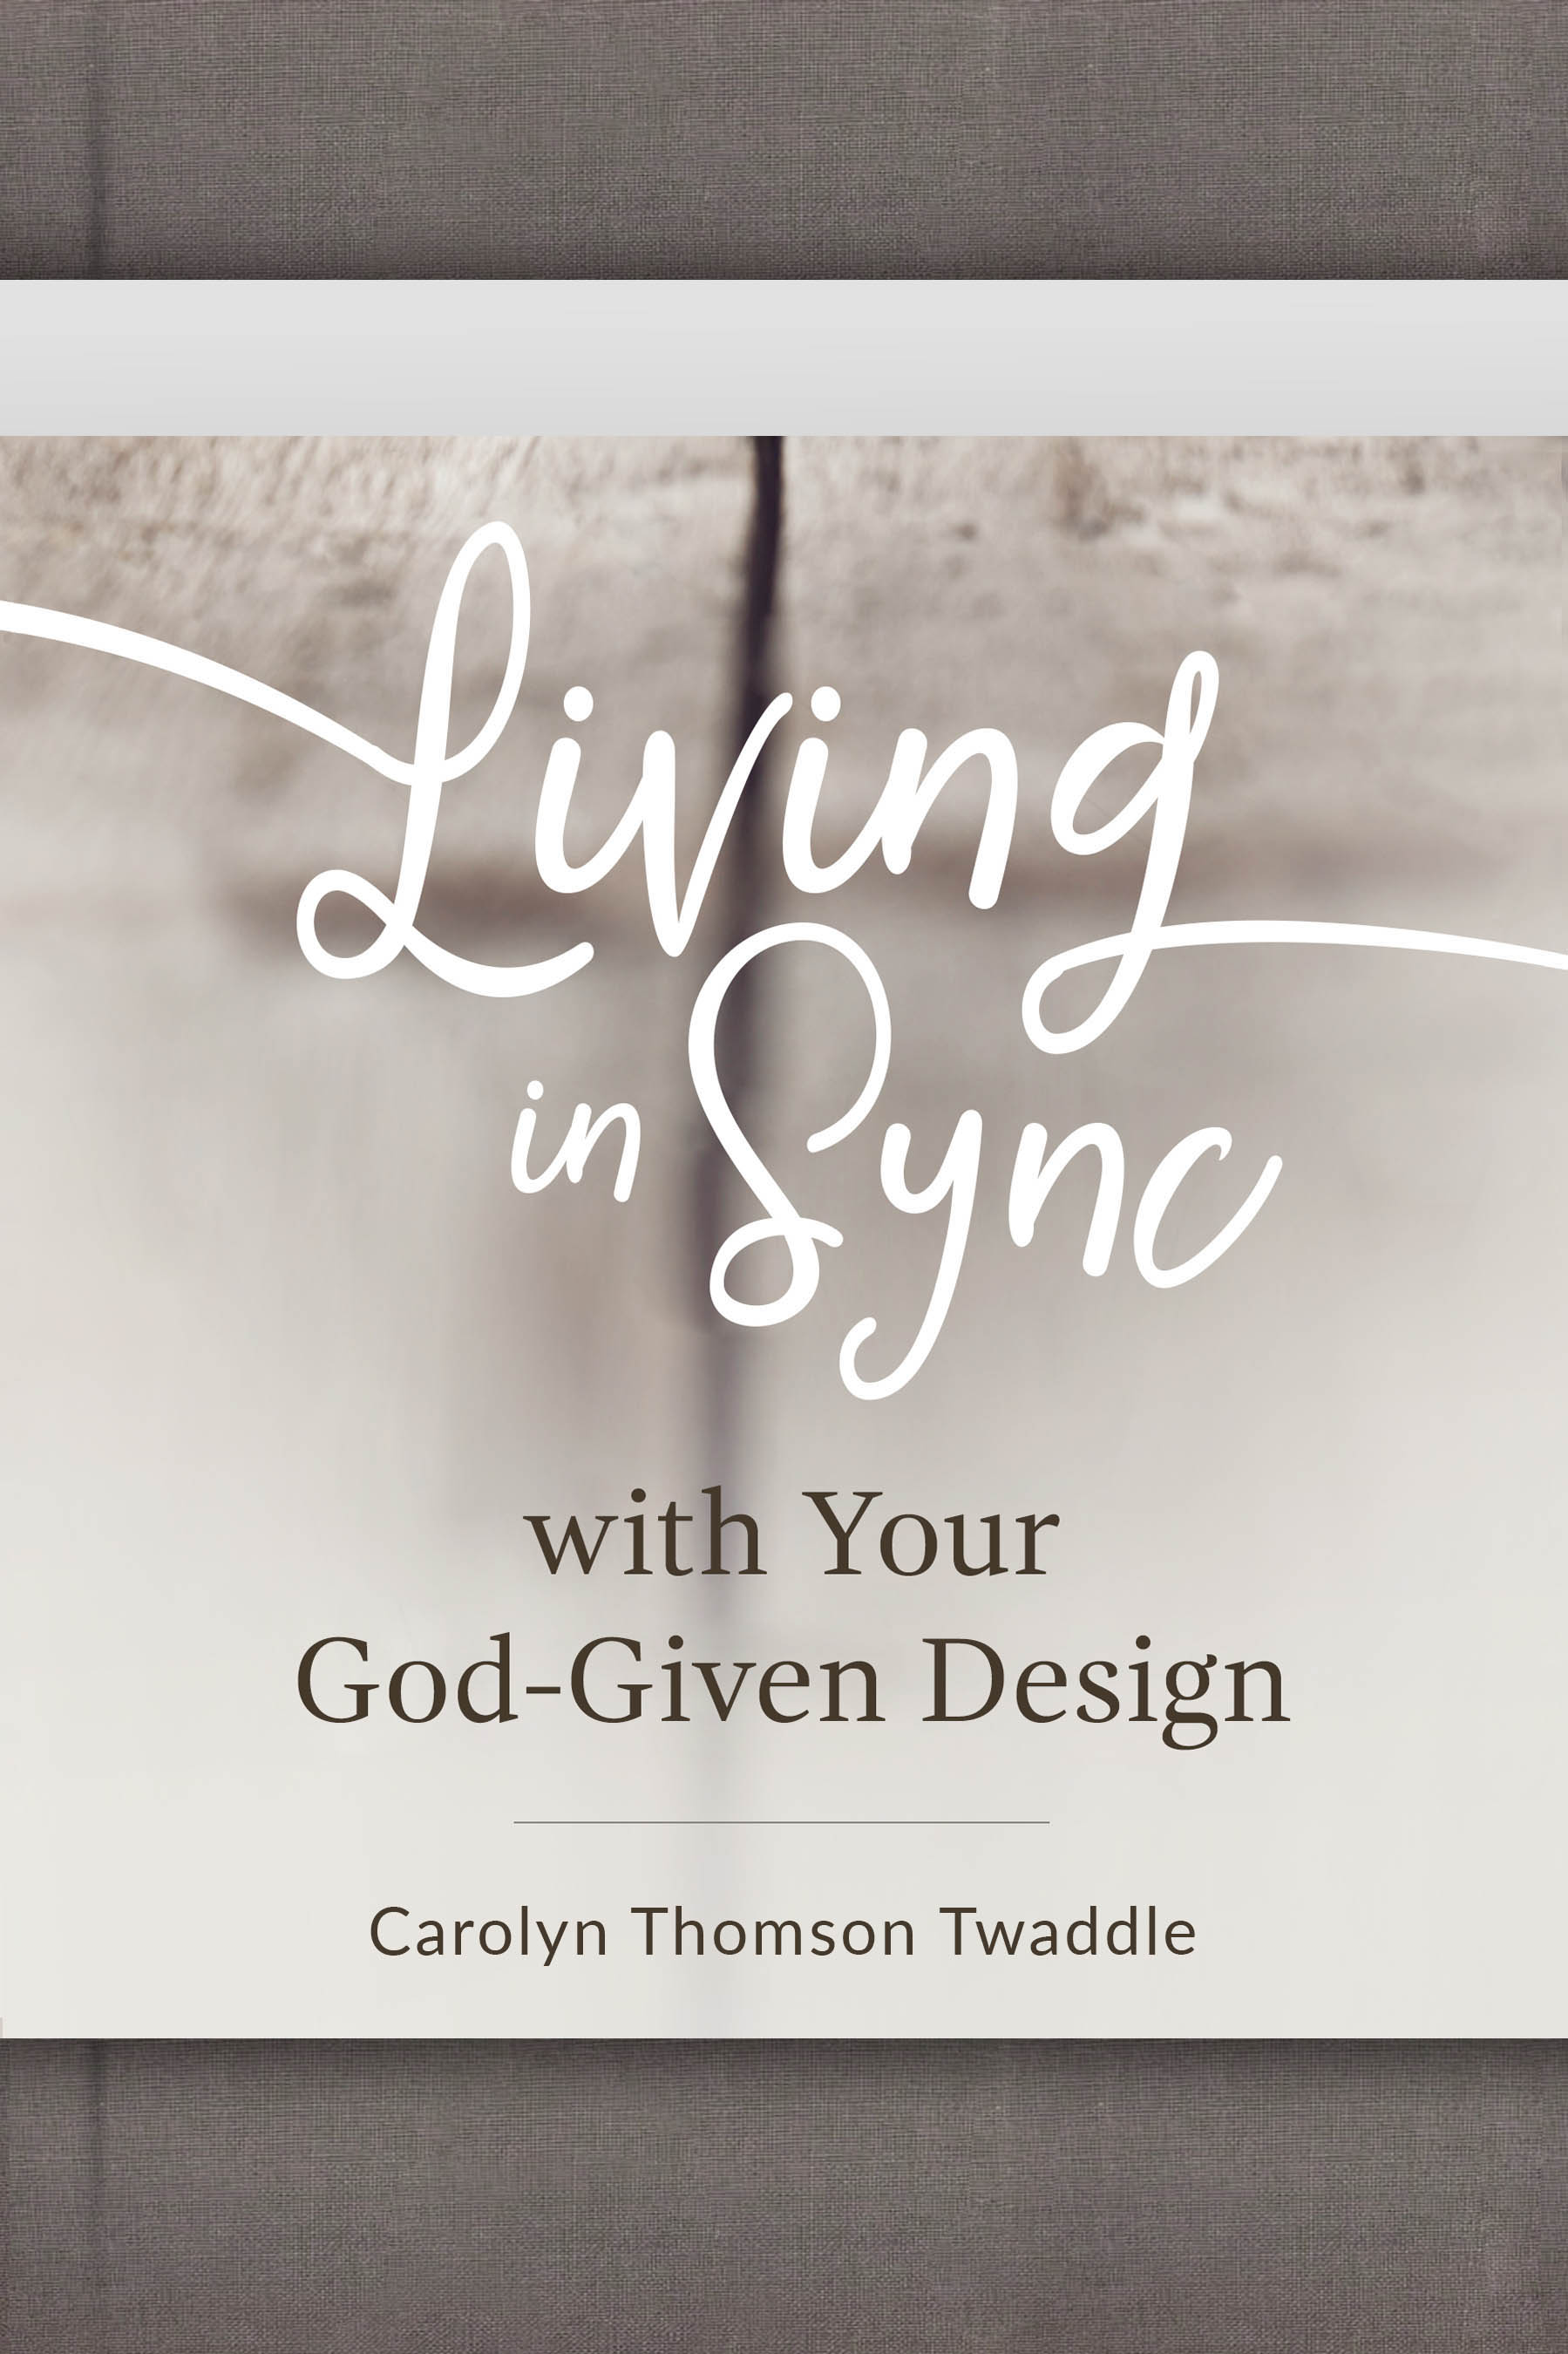 FREE: Living in Sync with Your God-Given Design by Carolyn Thomson Twaddle